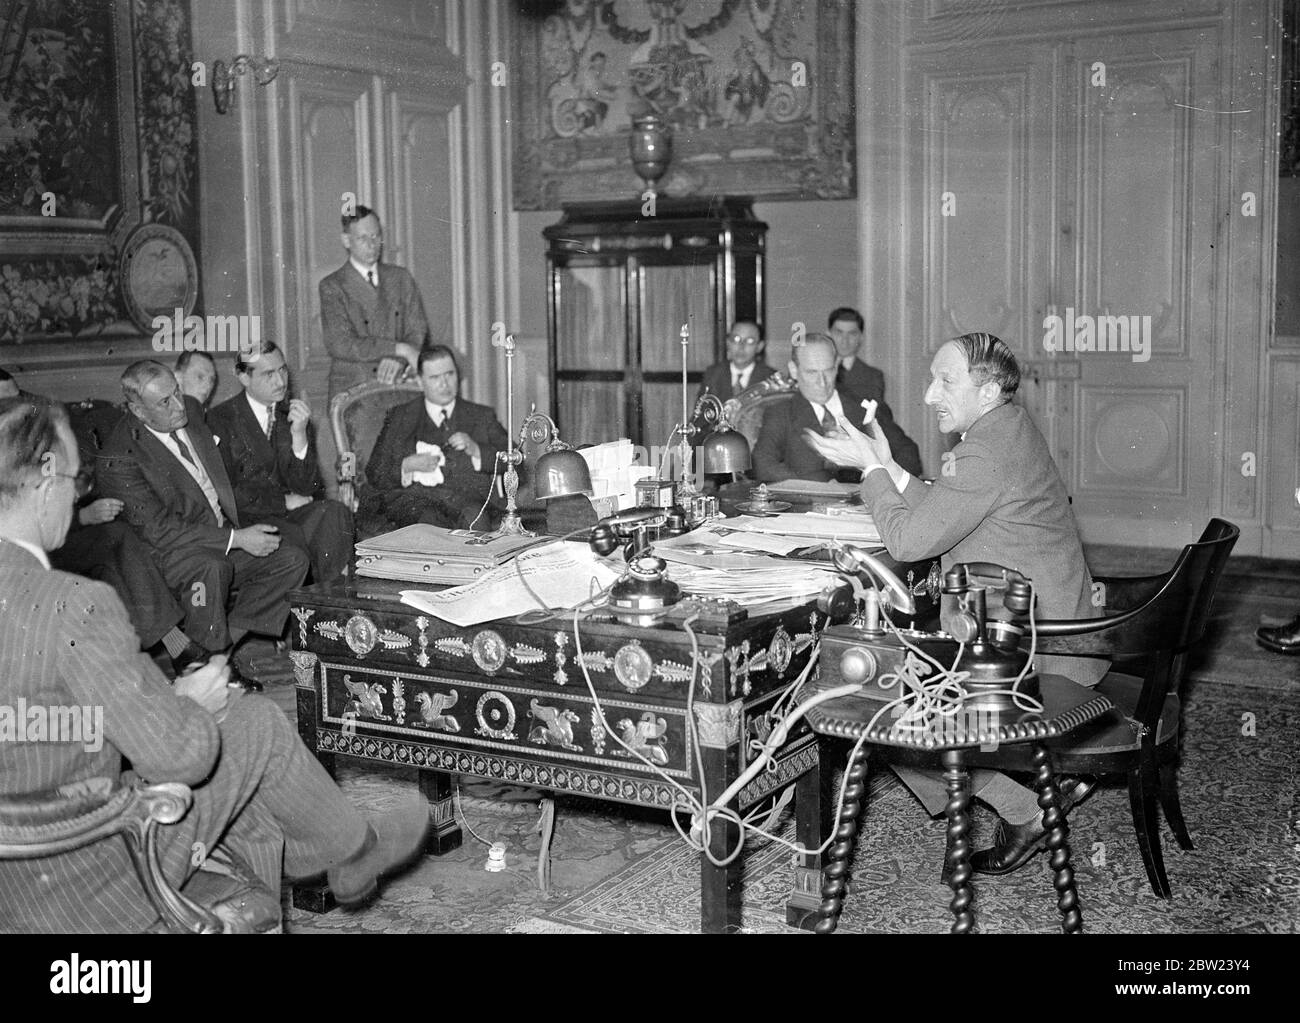 M George Bonnets , the French Finance Minister , making his statement to British journalists at his office in Paris about the drastic new measures, including new taxes and economies , which are being taken to solve the French financial crisis. 22 July 1937 Stock Photo